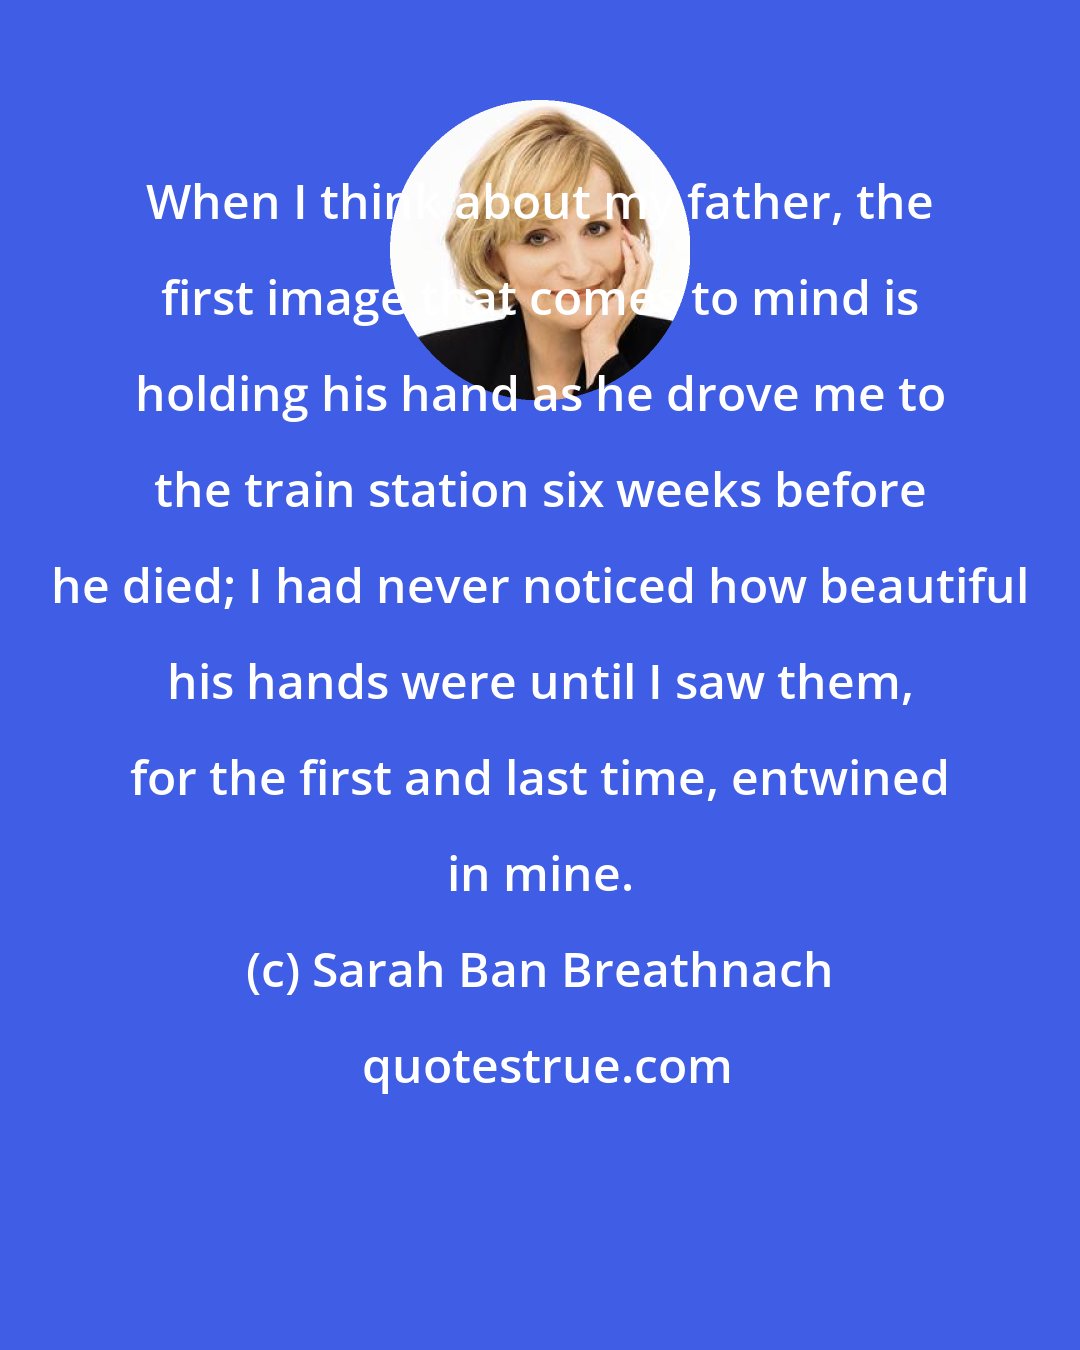 Sarah Ban Breathnach: When I think about my father, the first image that comes to mind is holding his hand as he drove me to the train station six weeks before he died; I had never noticed how beautiful his hands were until I saw them, for the first and last time, entwined in mine.